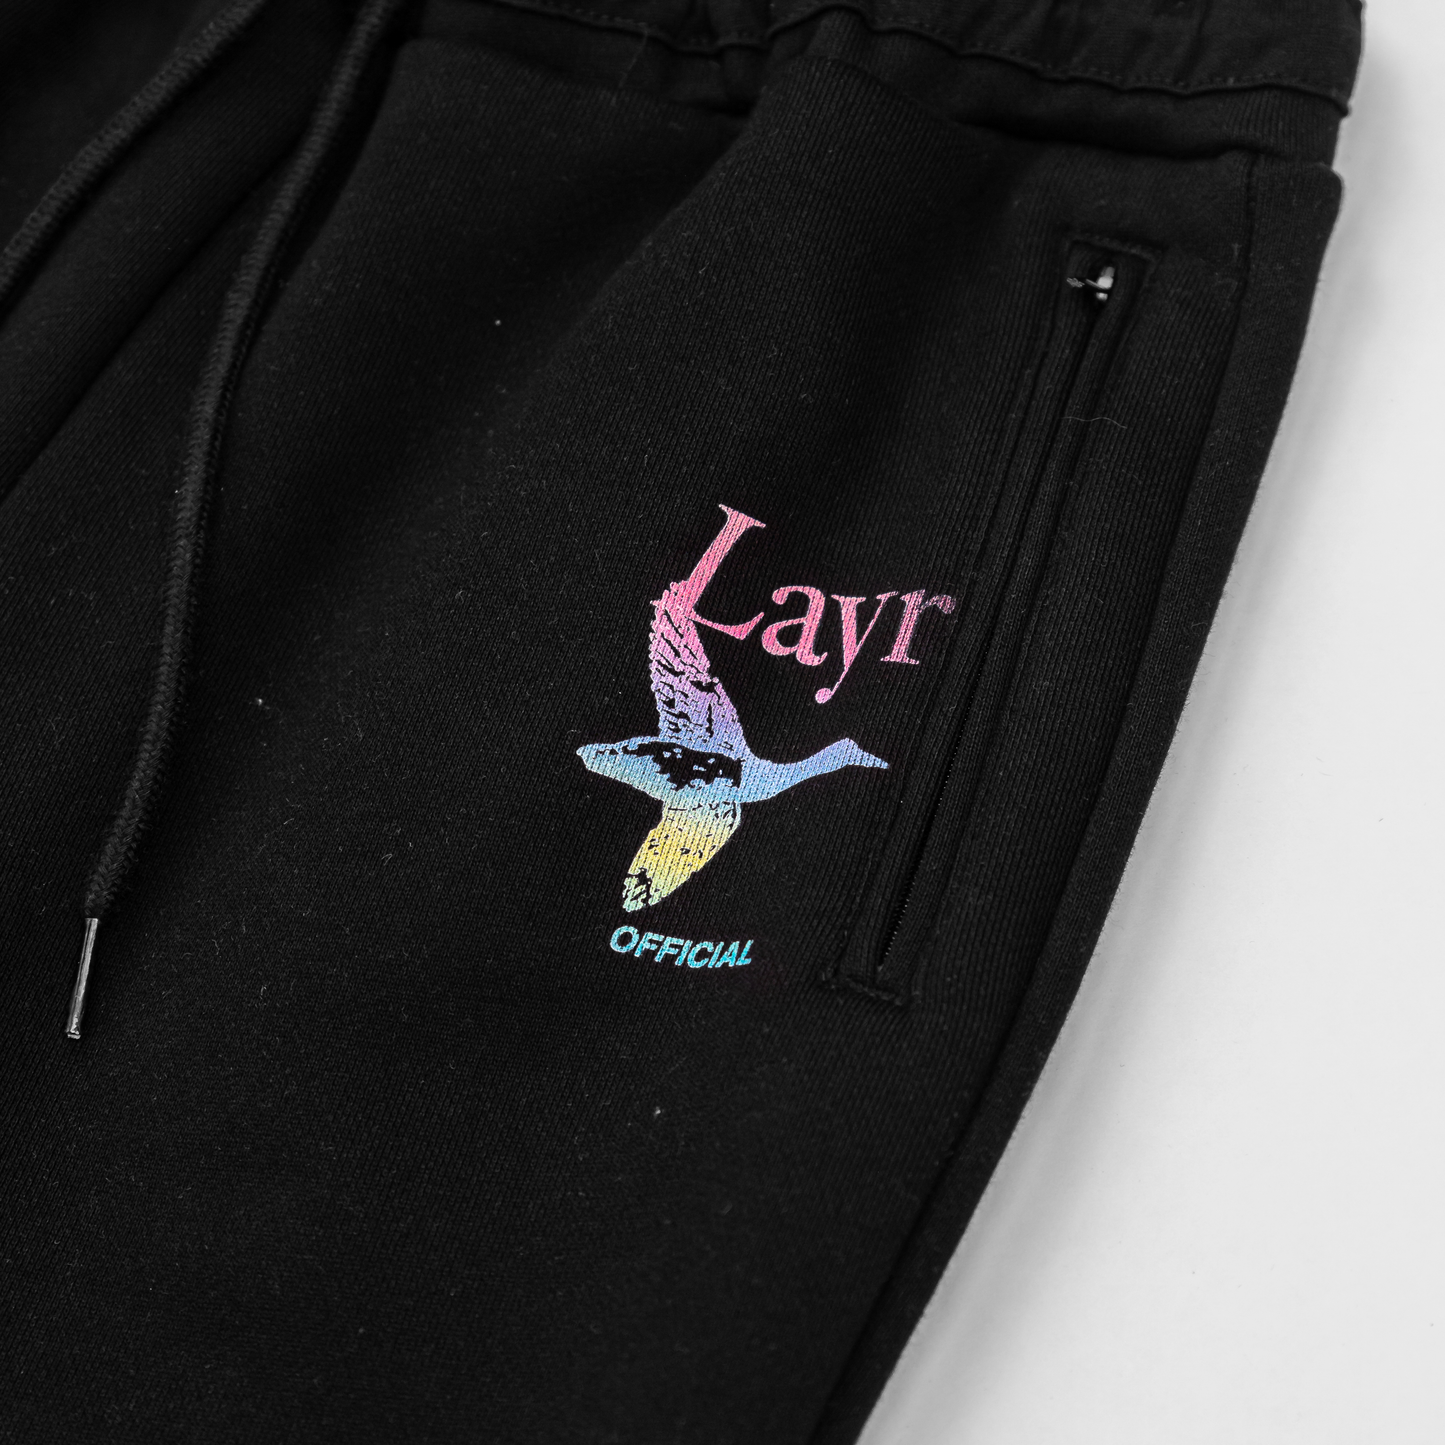 Flying Duck Utility Joggers, Black - Layr Official